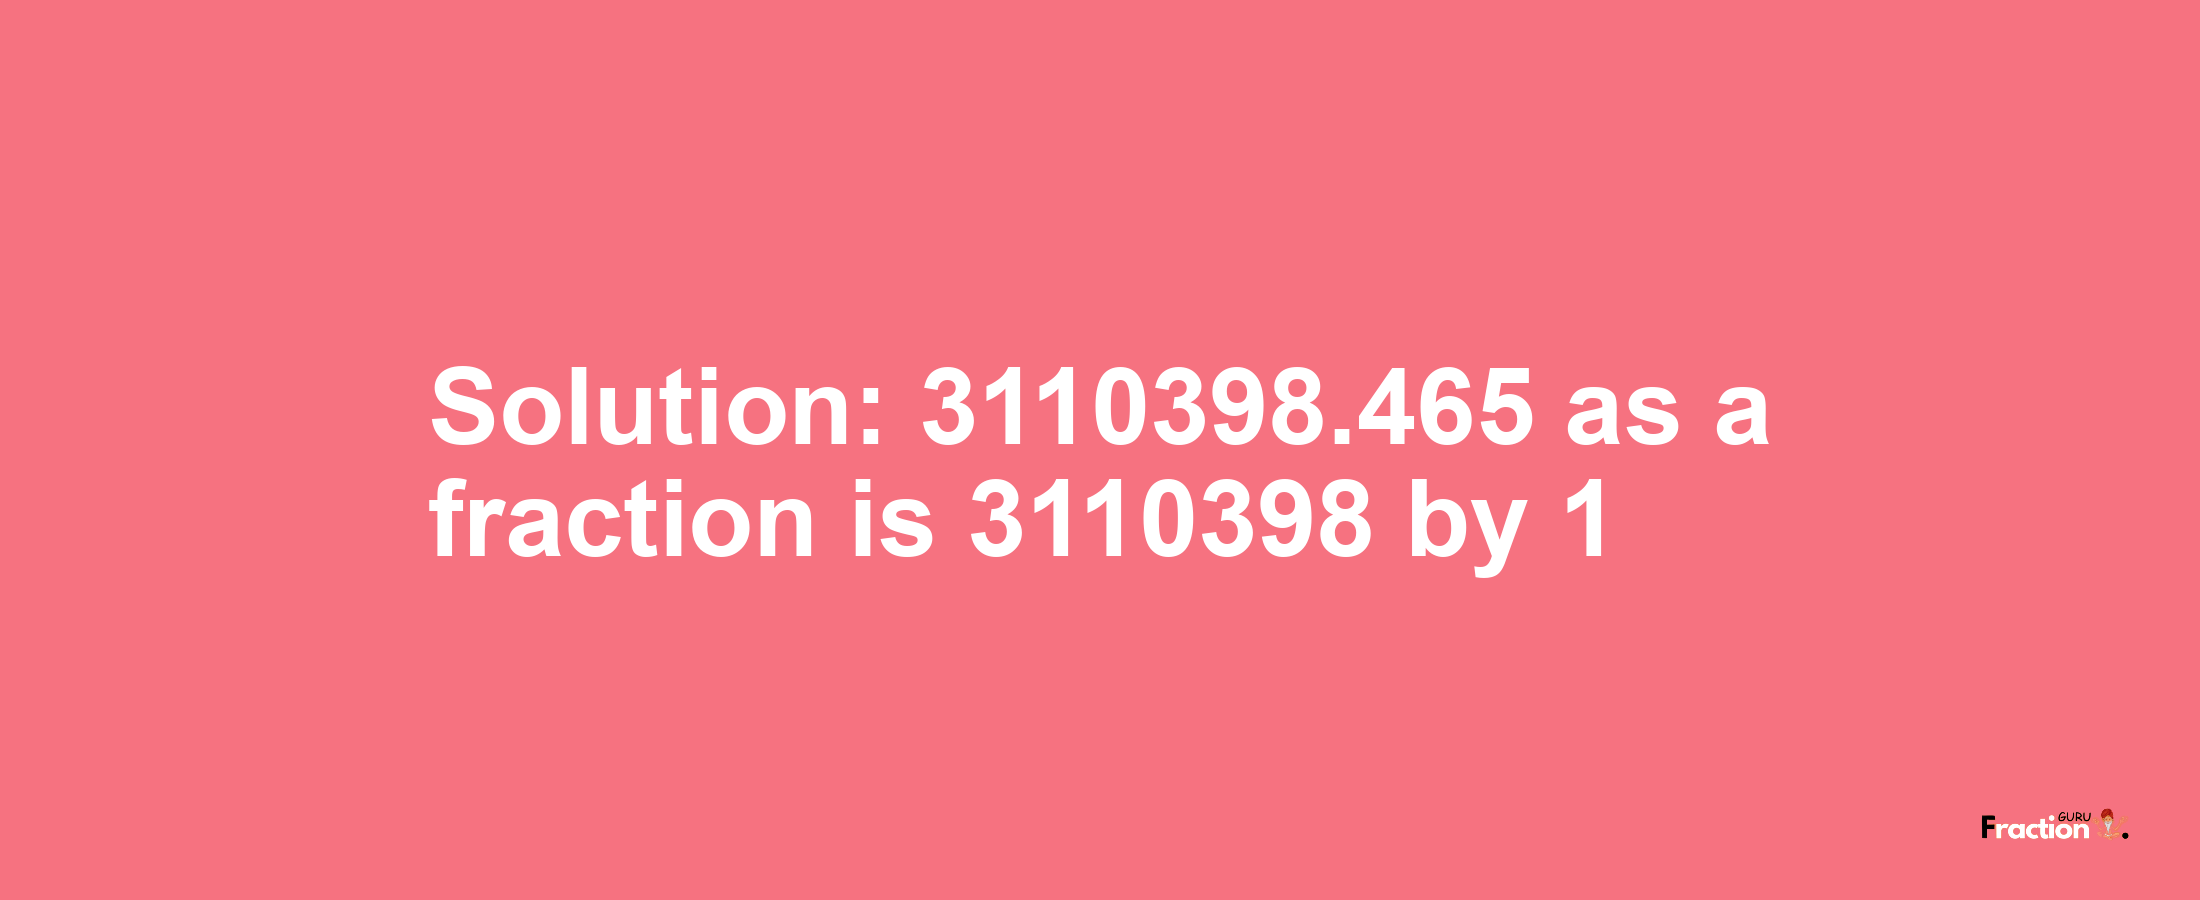 Solution:3110398.465 as a fraction is 3110398/1